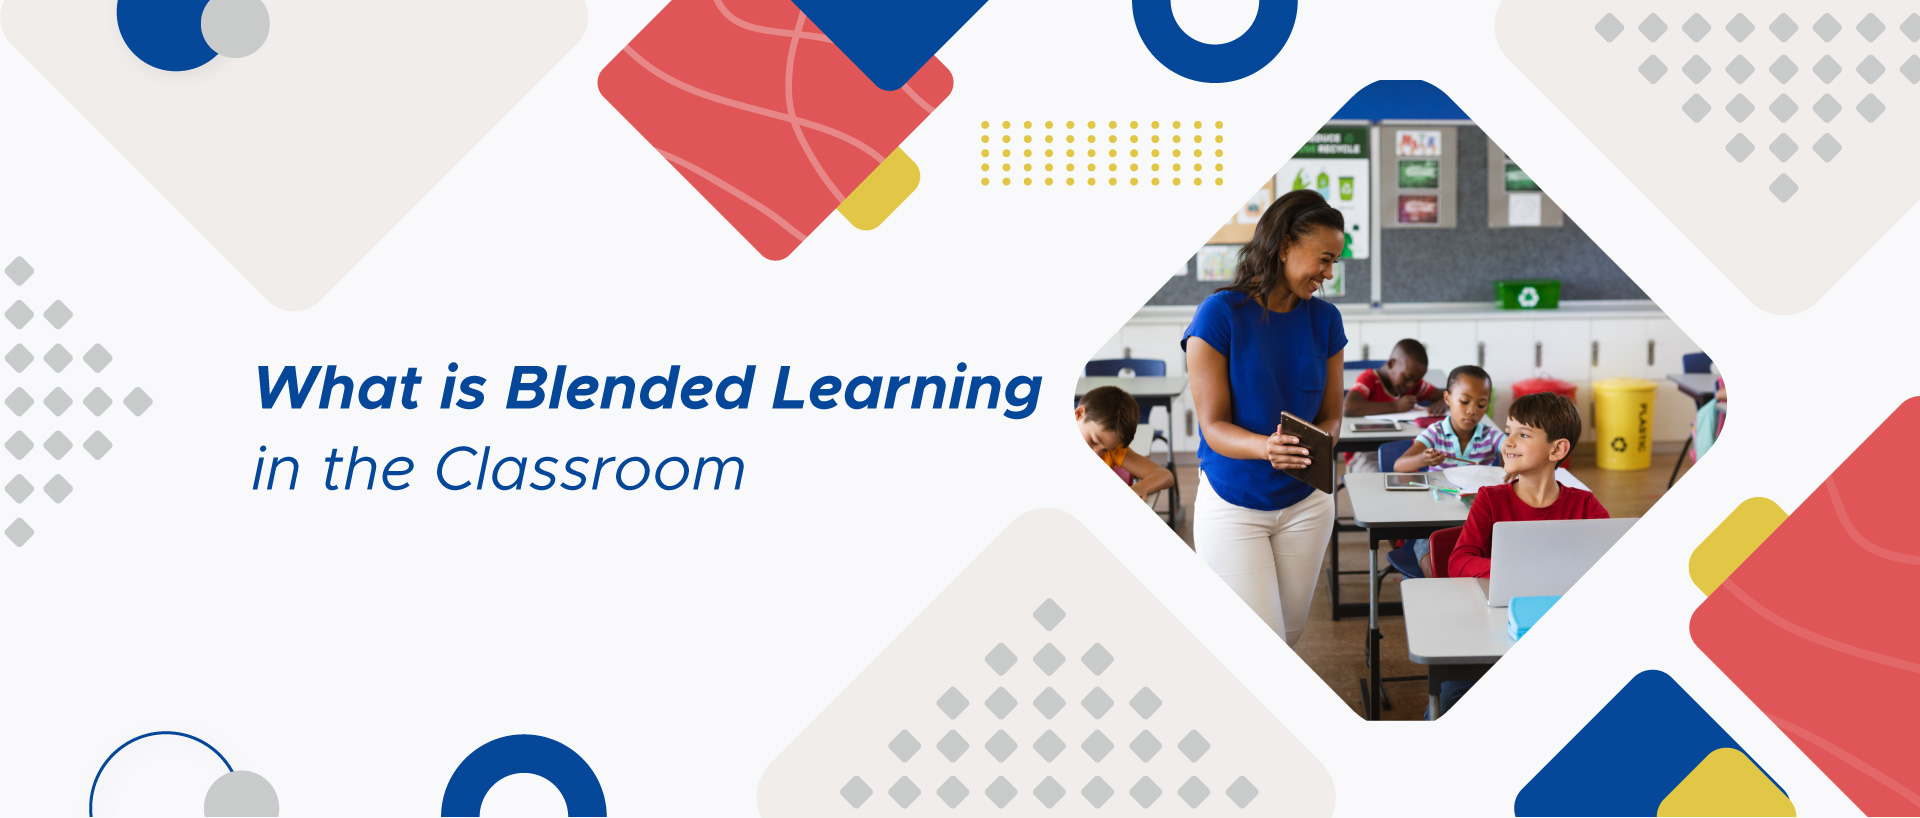 What is Blended Learning in The Classroom